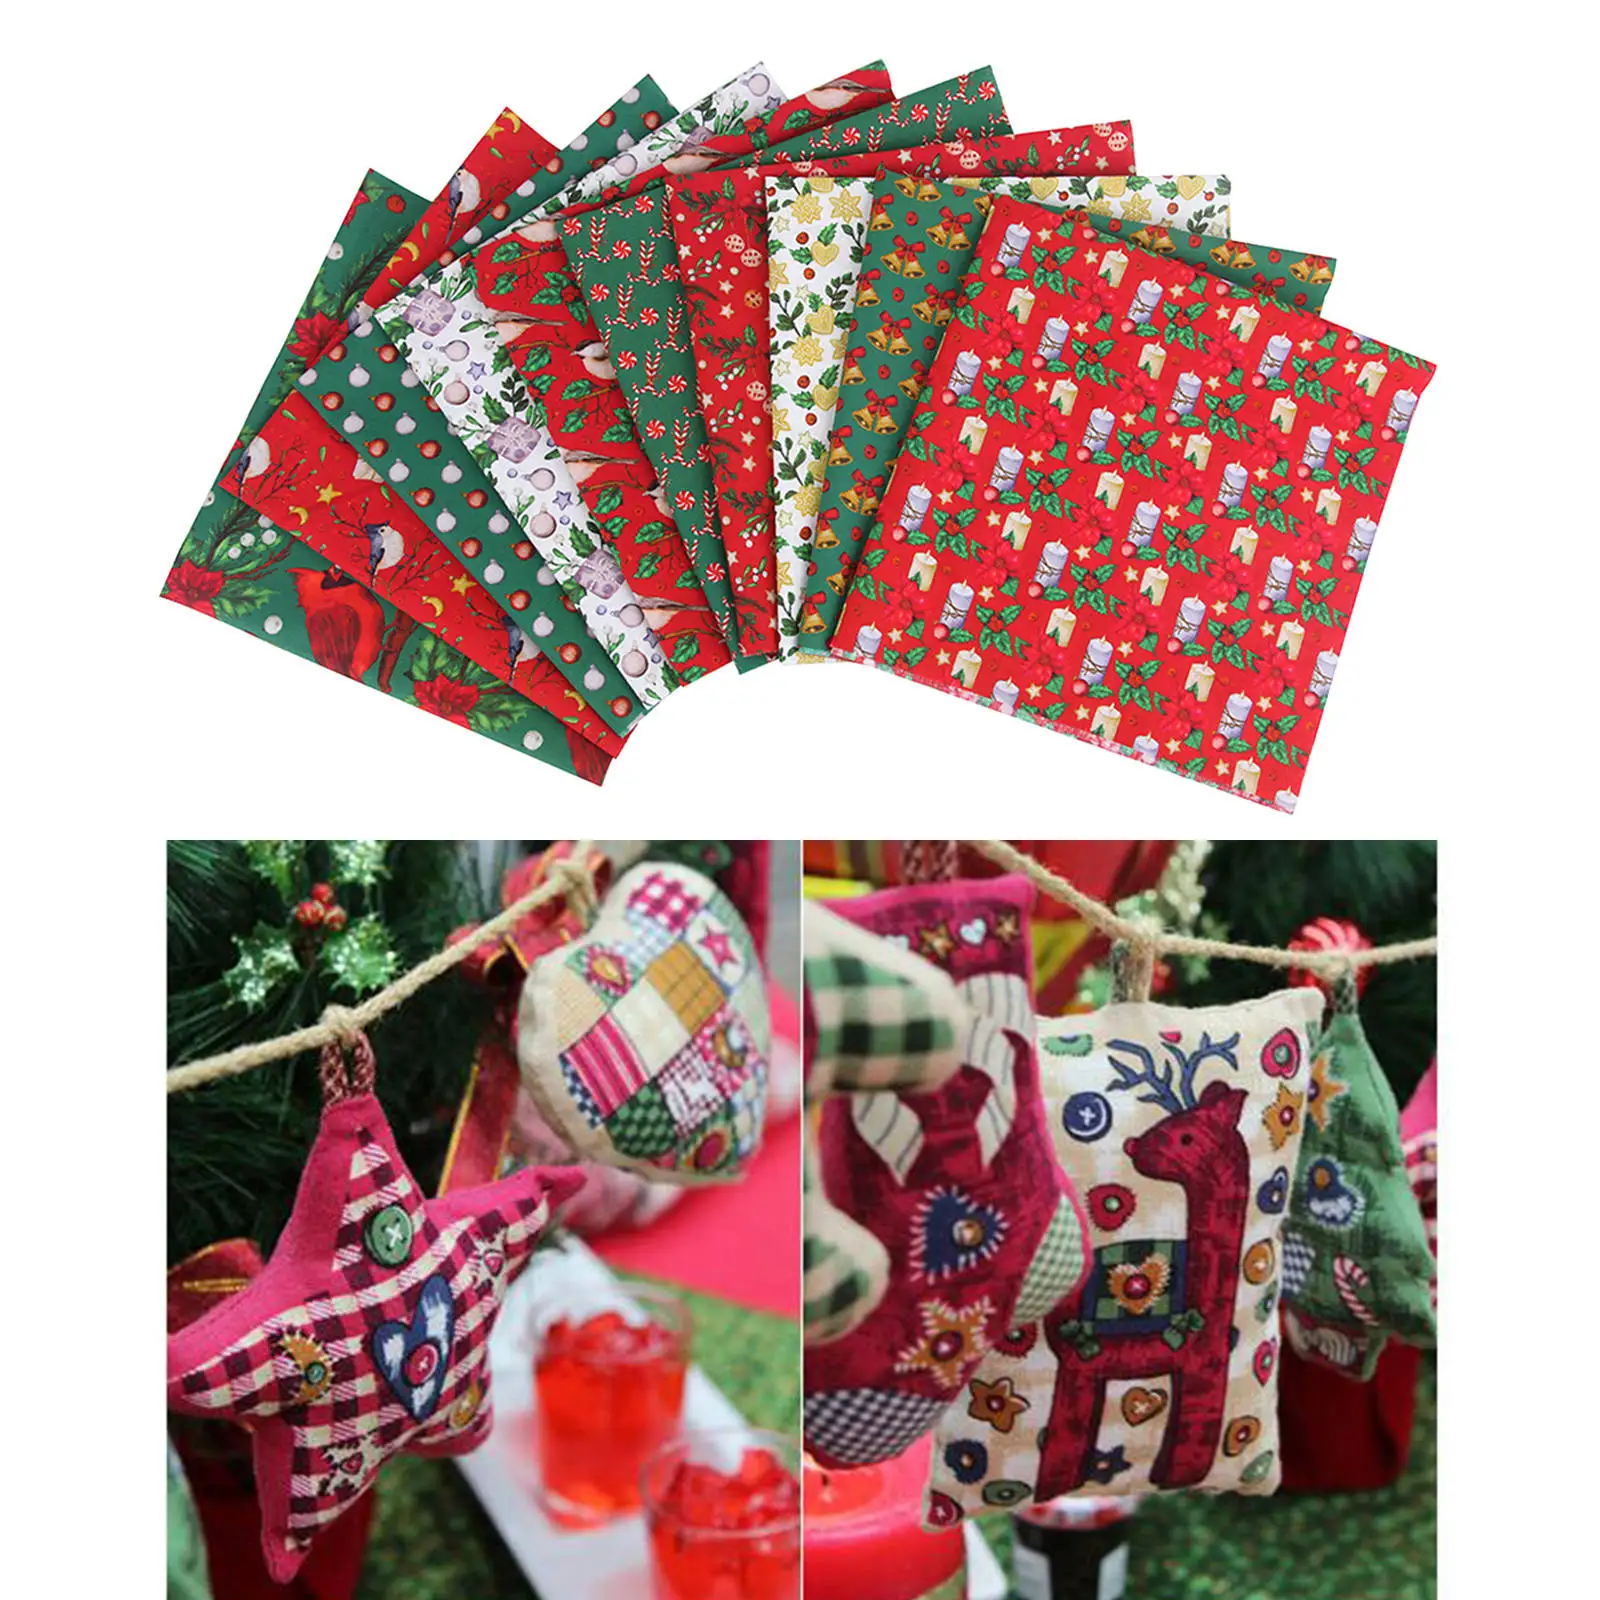 10pcs Christmas Fabric Quilting Sewing Fabric Patchwork Needlework Christmas Fabric Scraps for Dress Apron Crafts, 20 x 20 Inch